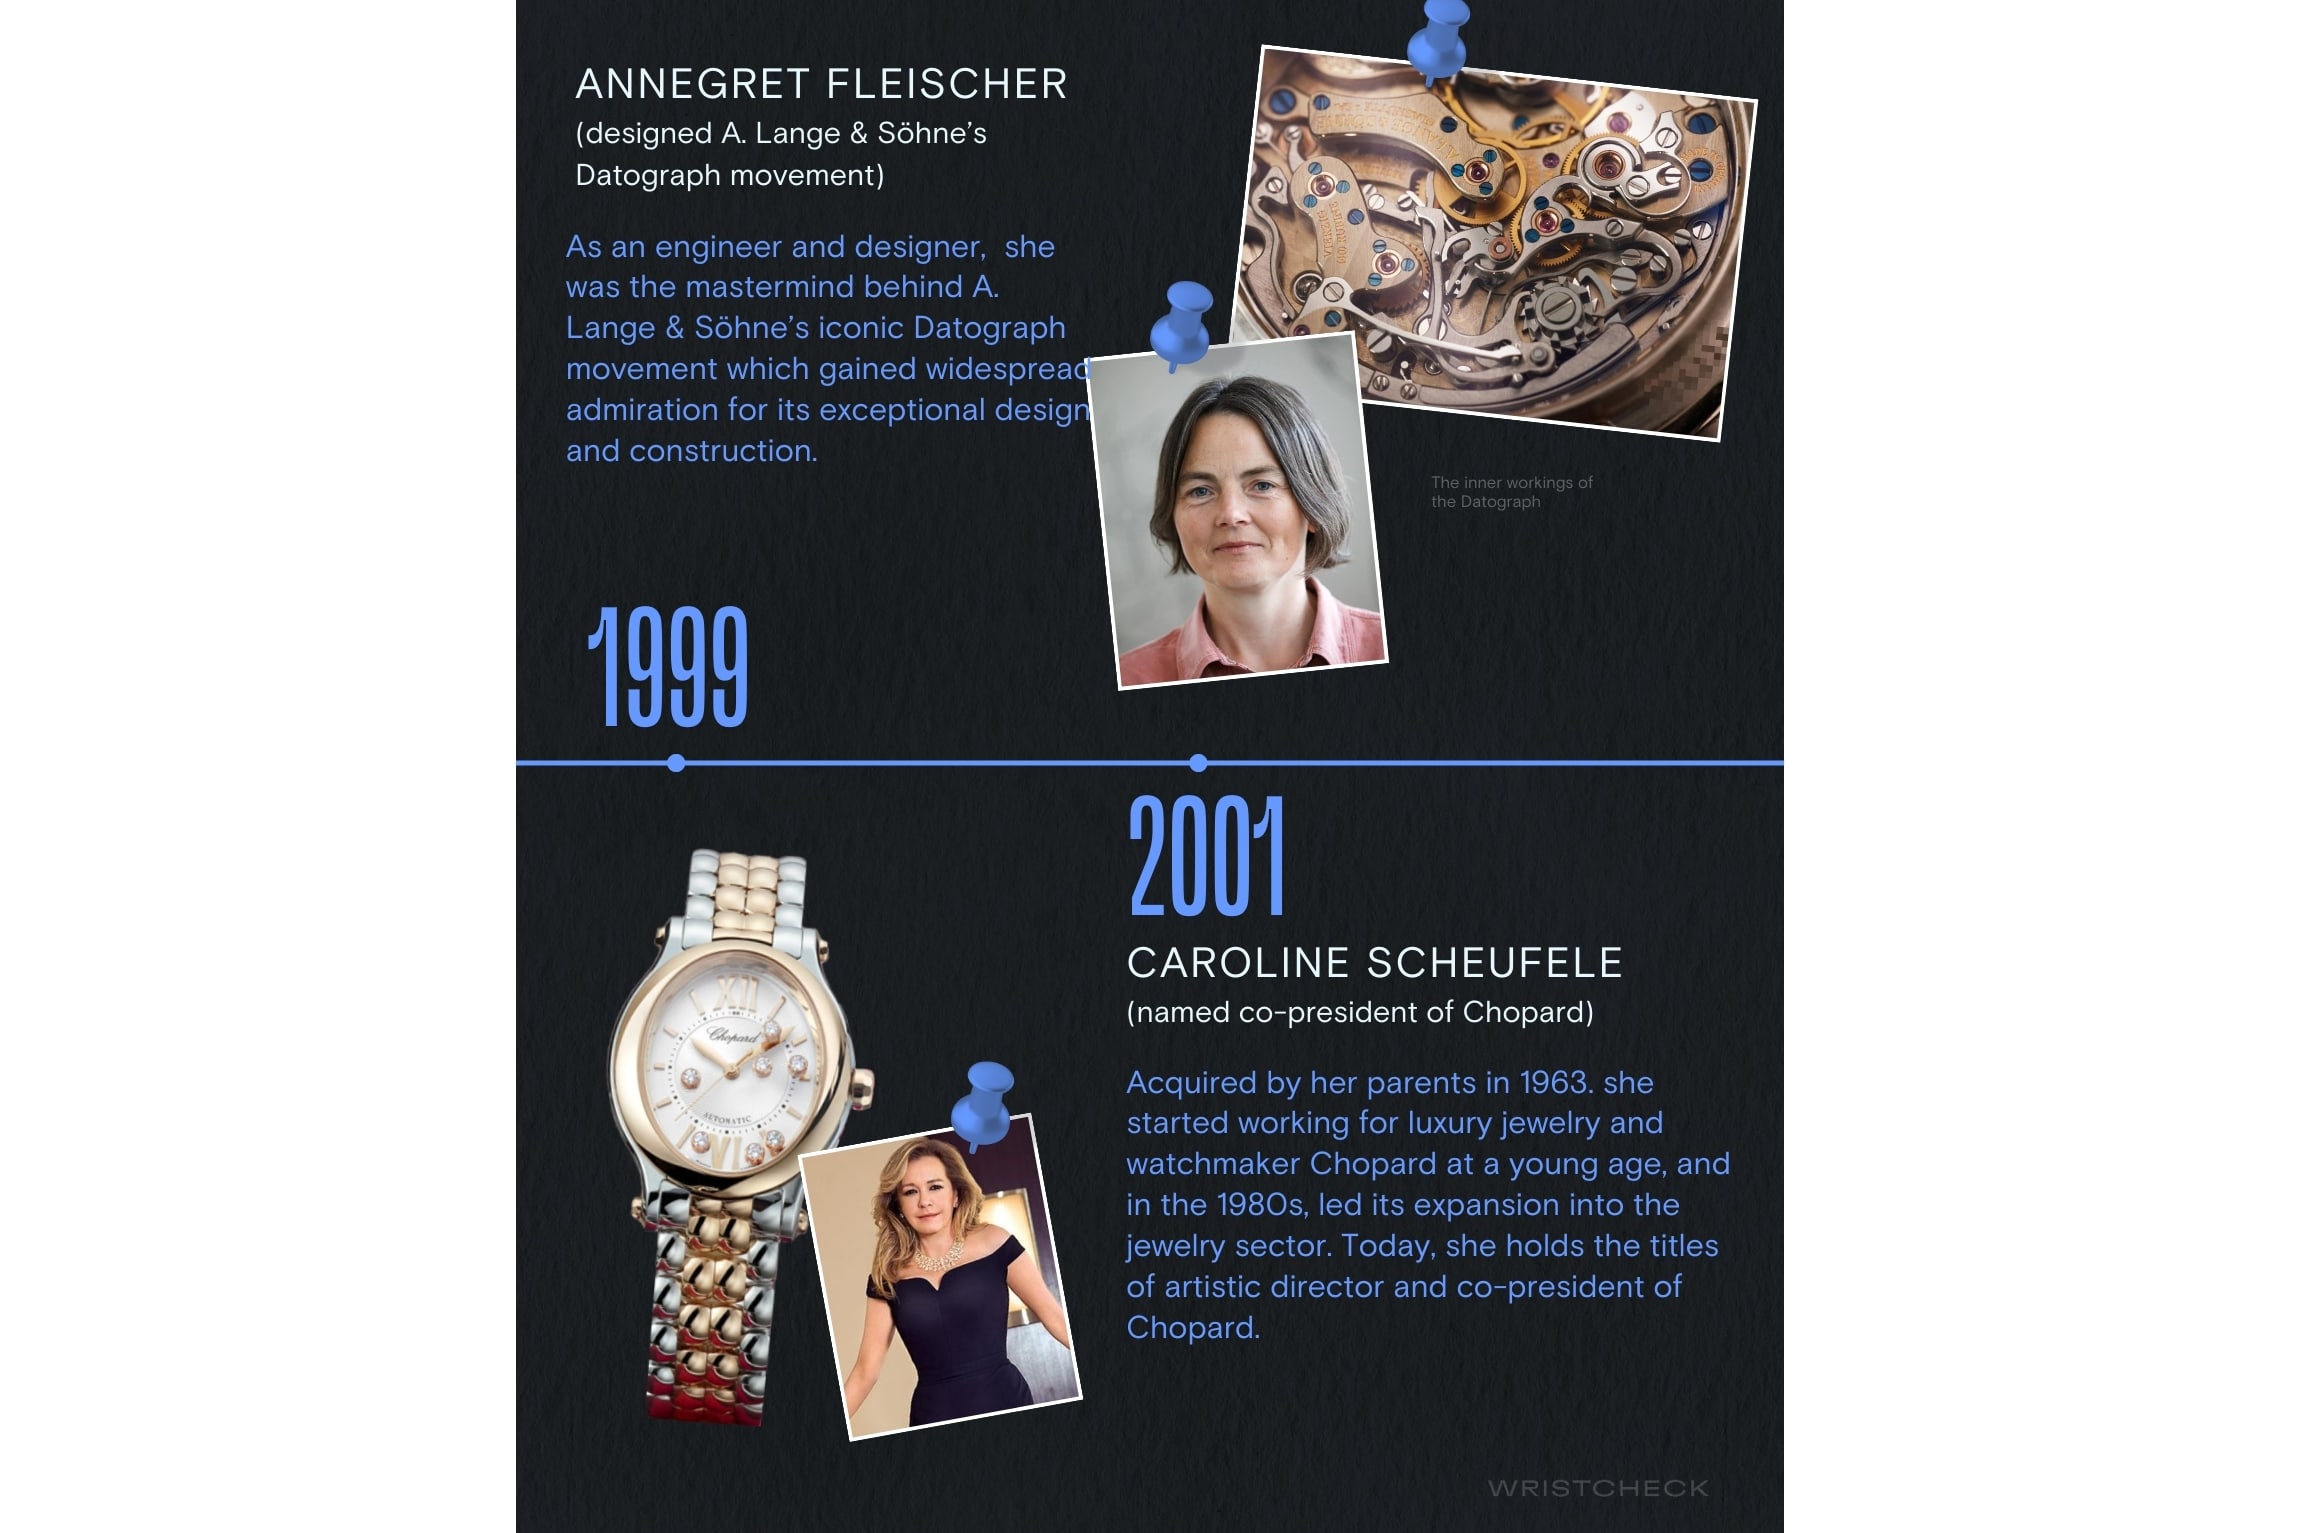 Horology Queens: Women That Made Watch History